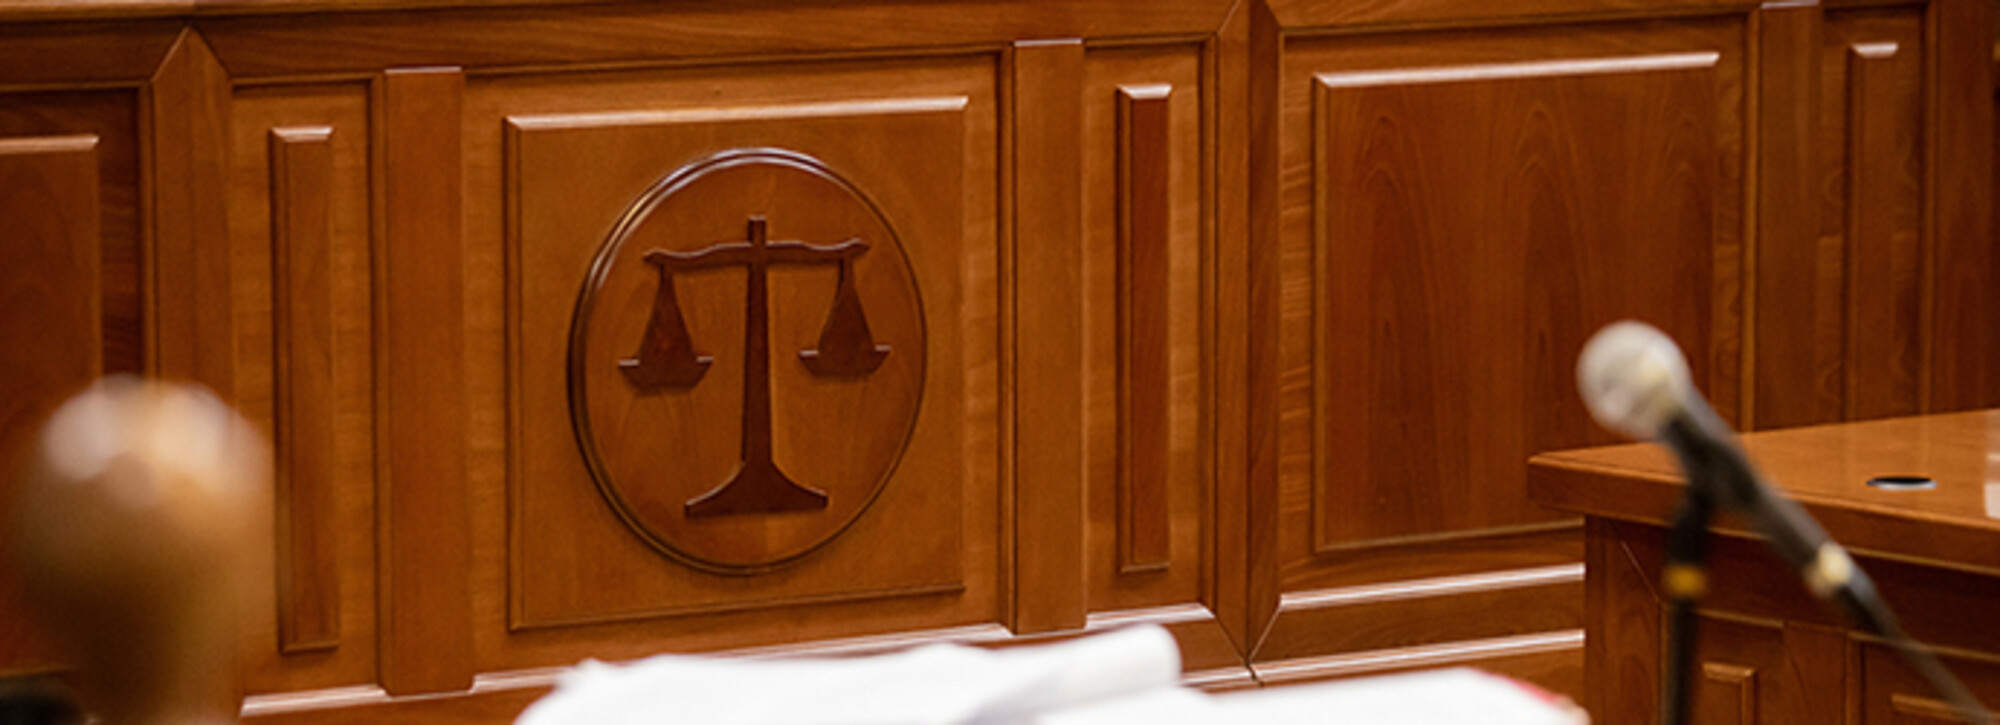 The front of a judge's bench with scales of justice depicted in the wood paneling. A table and microphone are in the foreground 